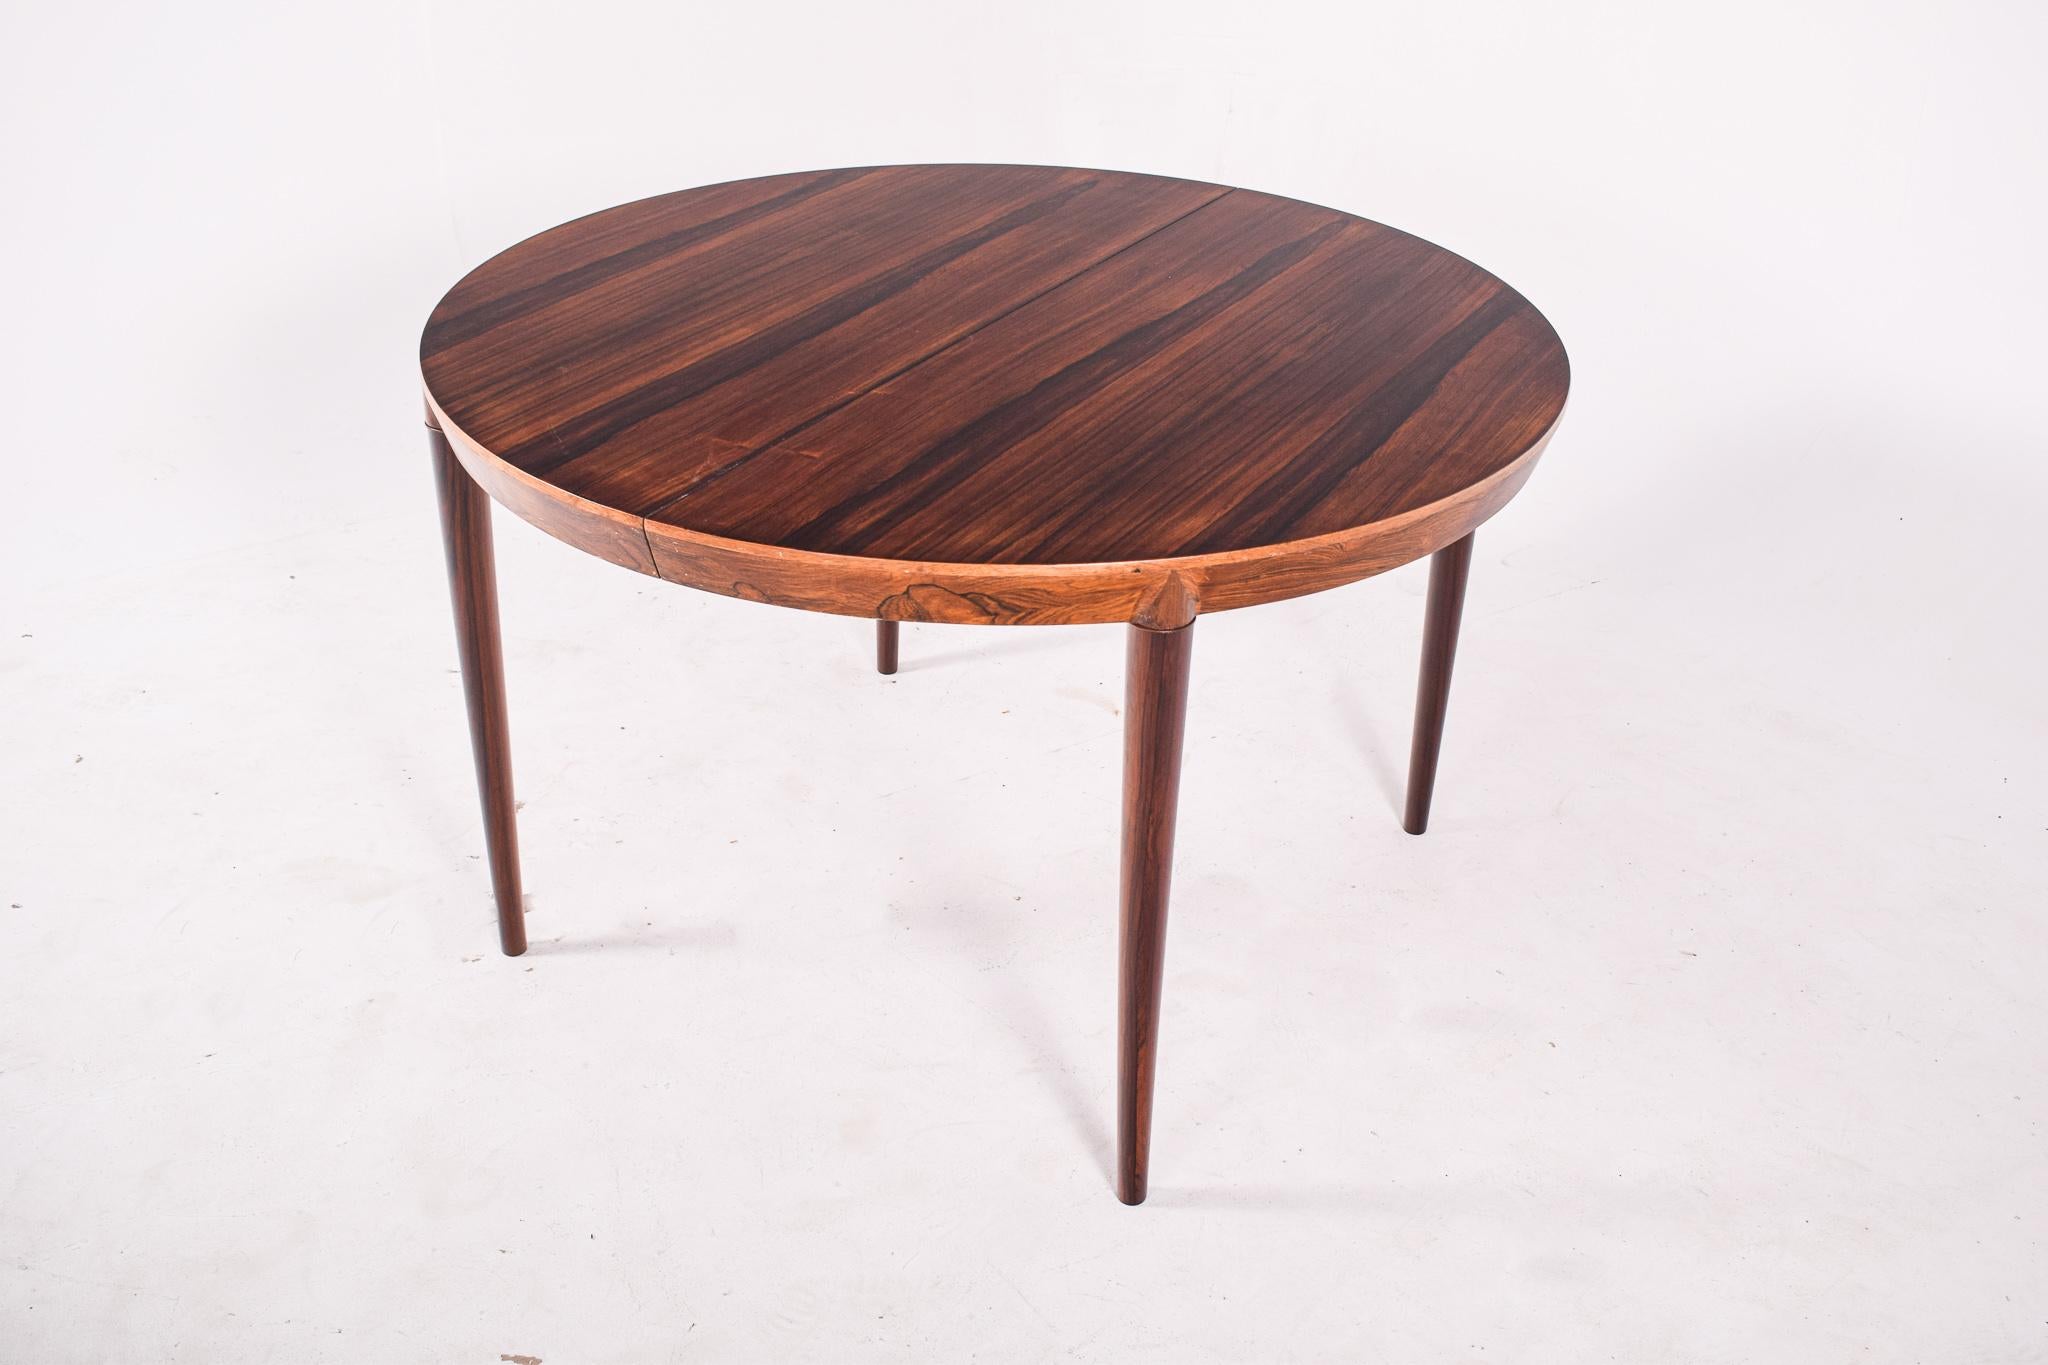 An elegant rosewood dining table by Severin Hansen Jr. for Haslev. This table features his hallmark angled joinery and comes with two leaves. The leaves have a slightly angled skirt like the table. The leaves measures 50 cm each.